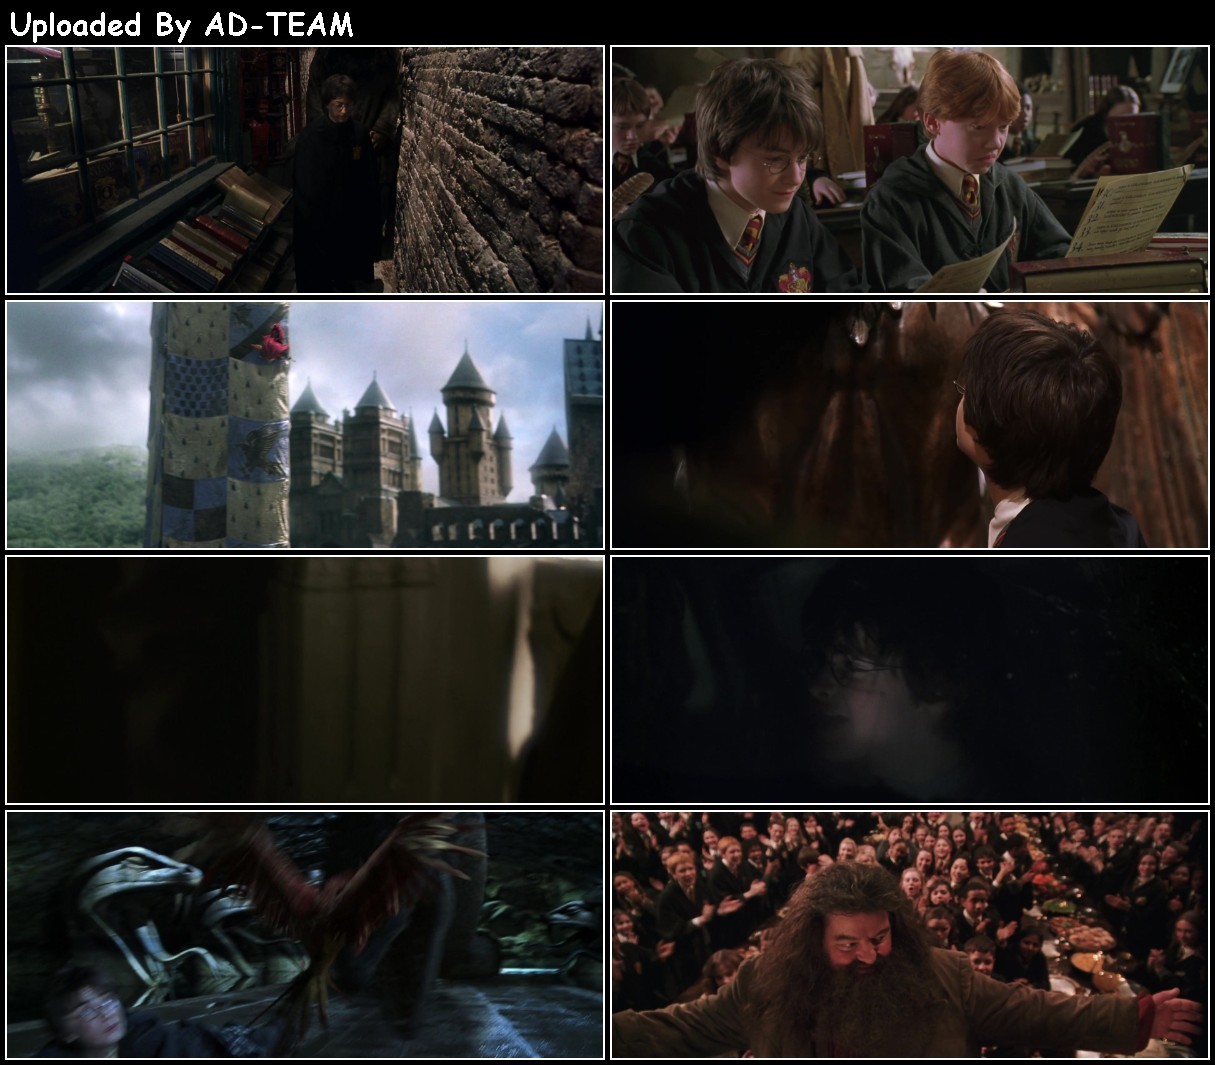 Harry Potter And The Chamber of Secrets 2002 EXTENDED 1080p BluRay H264 AAC-RARBG YjyMA29n_o